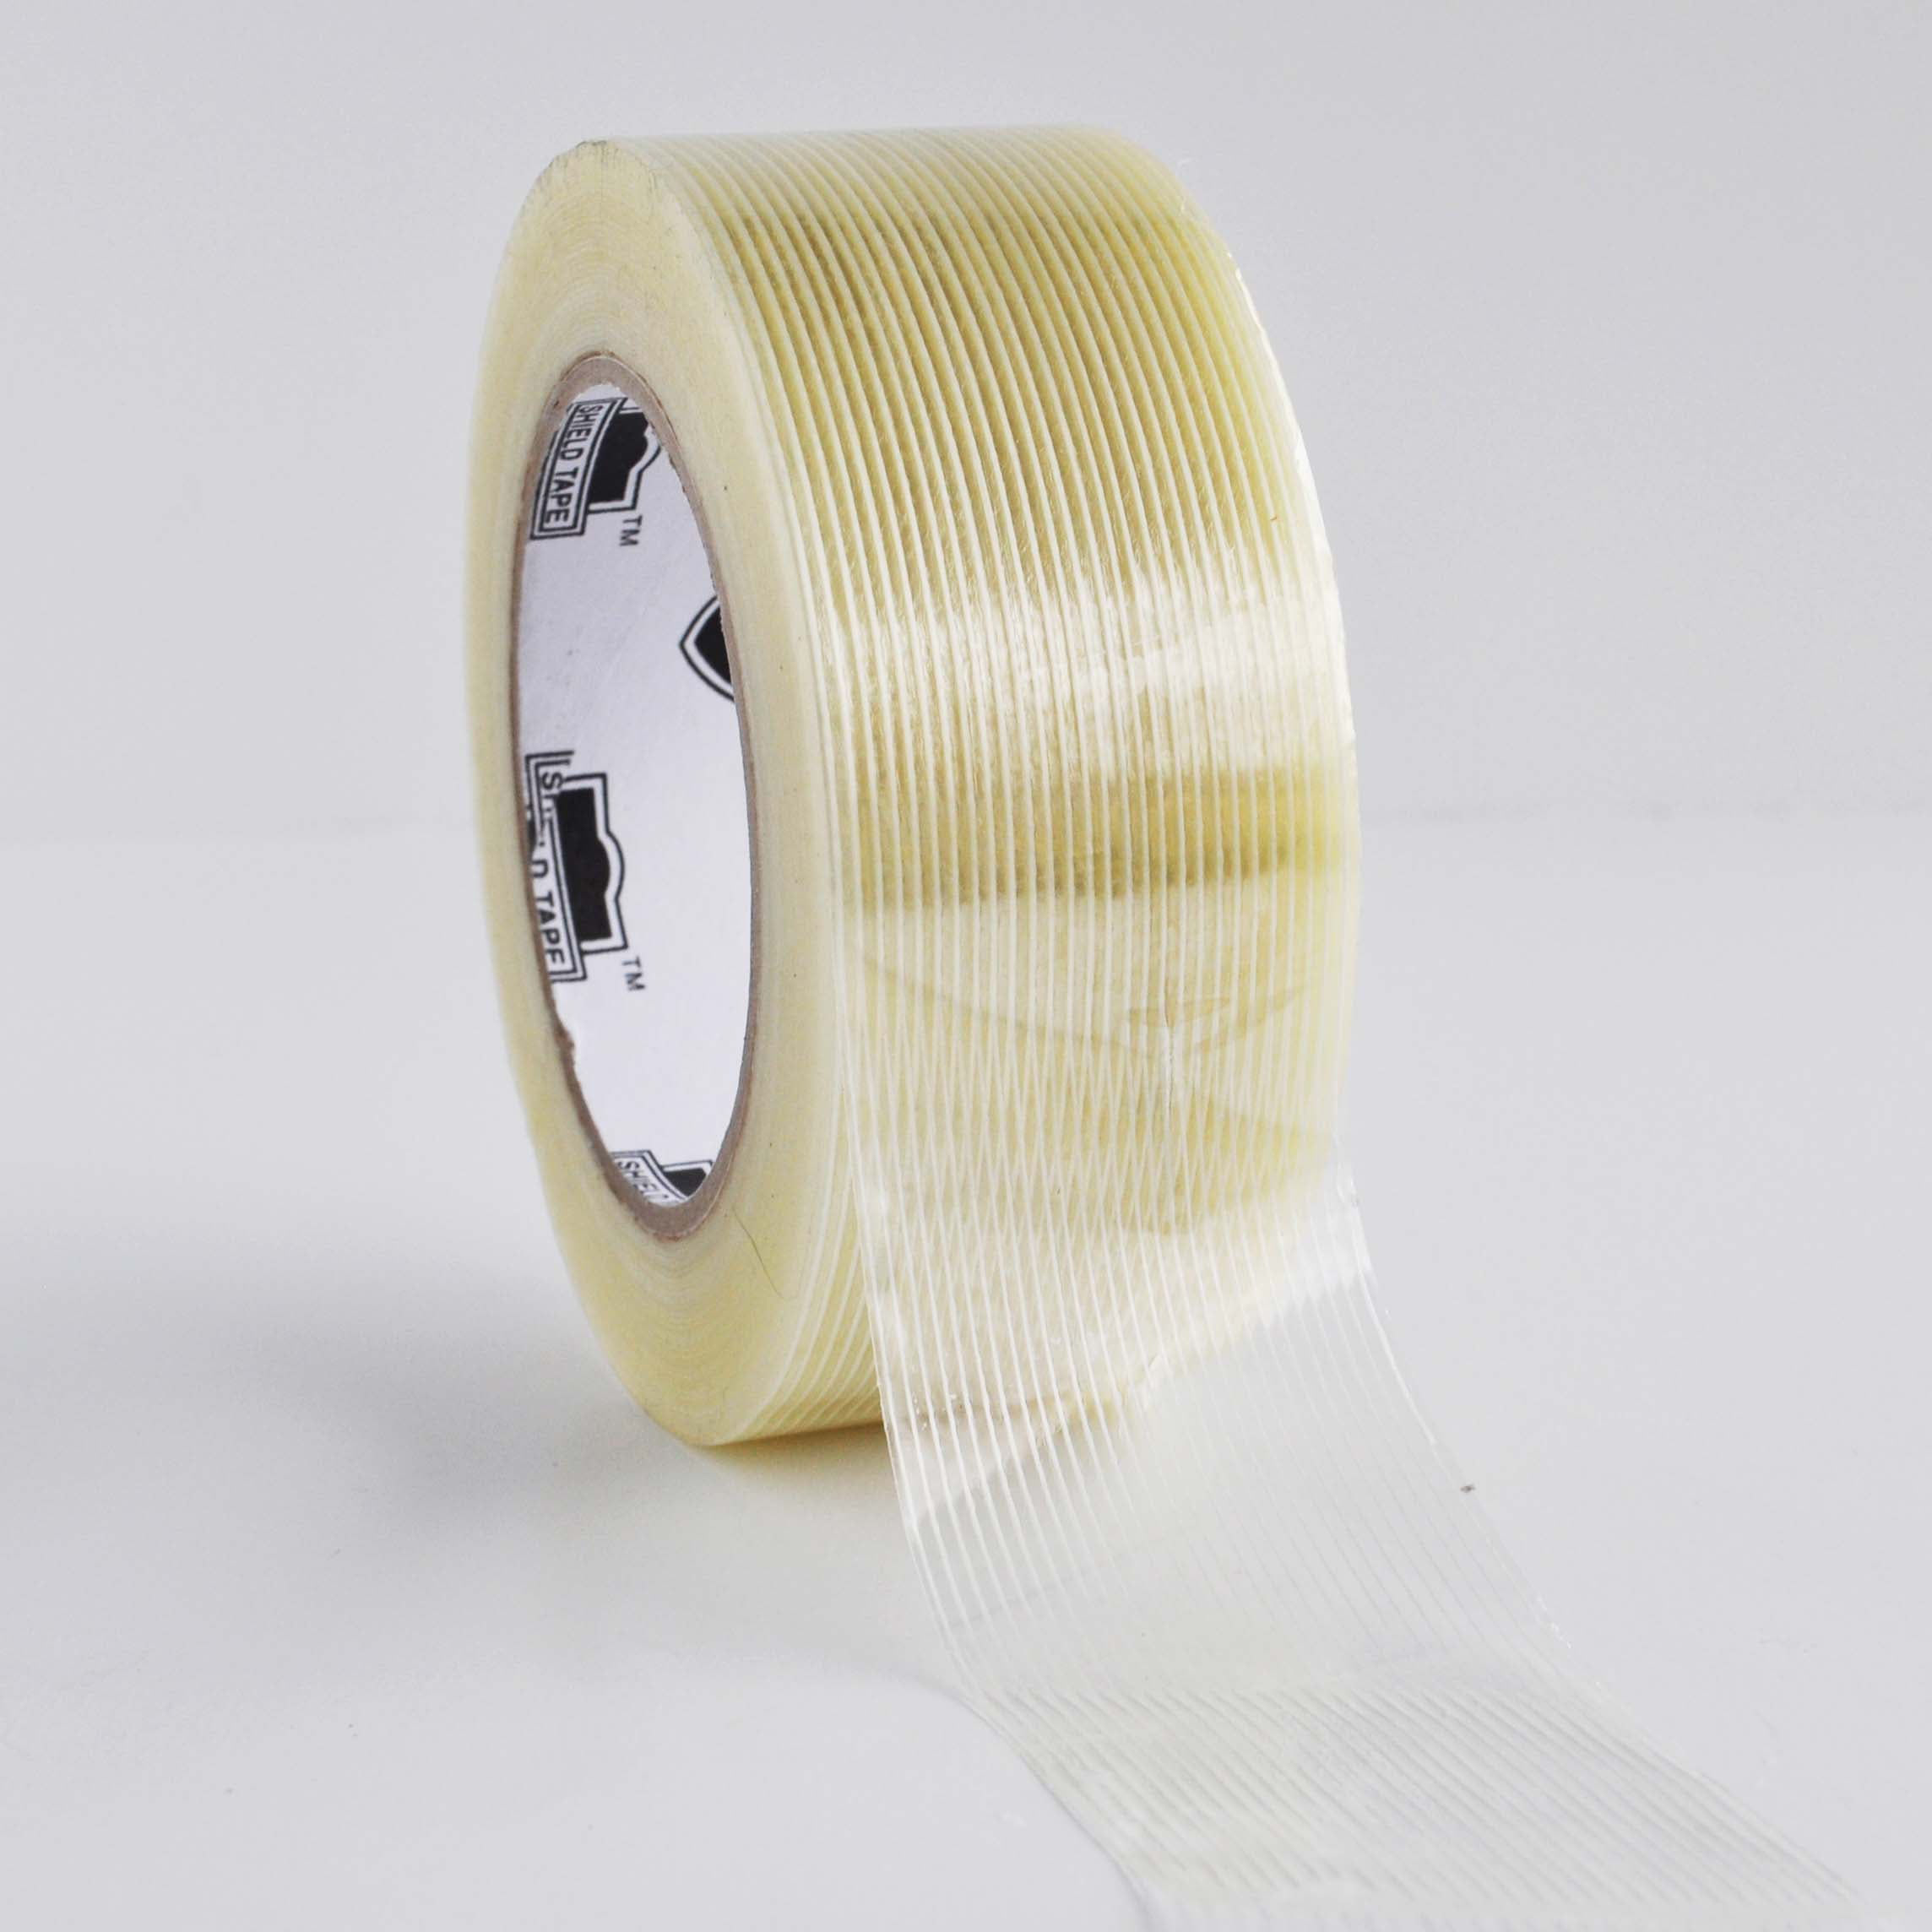 2 Rolls Bi-Directional Filament Strapping Tape 2" x 60 yd Free Shipping 